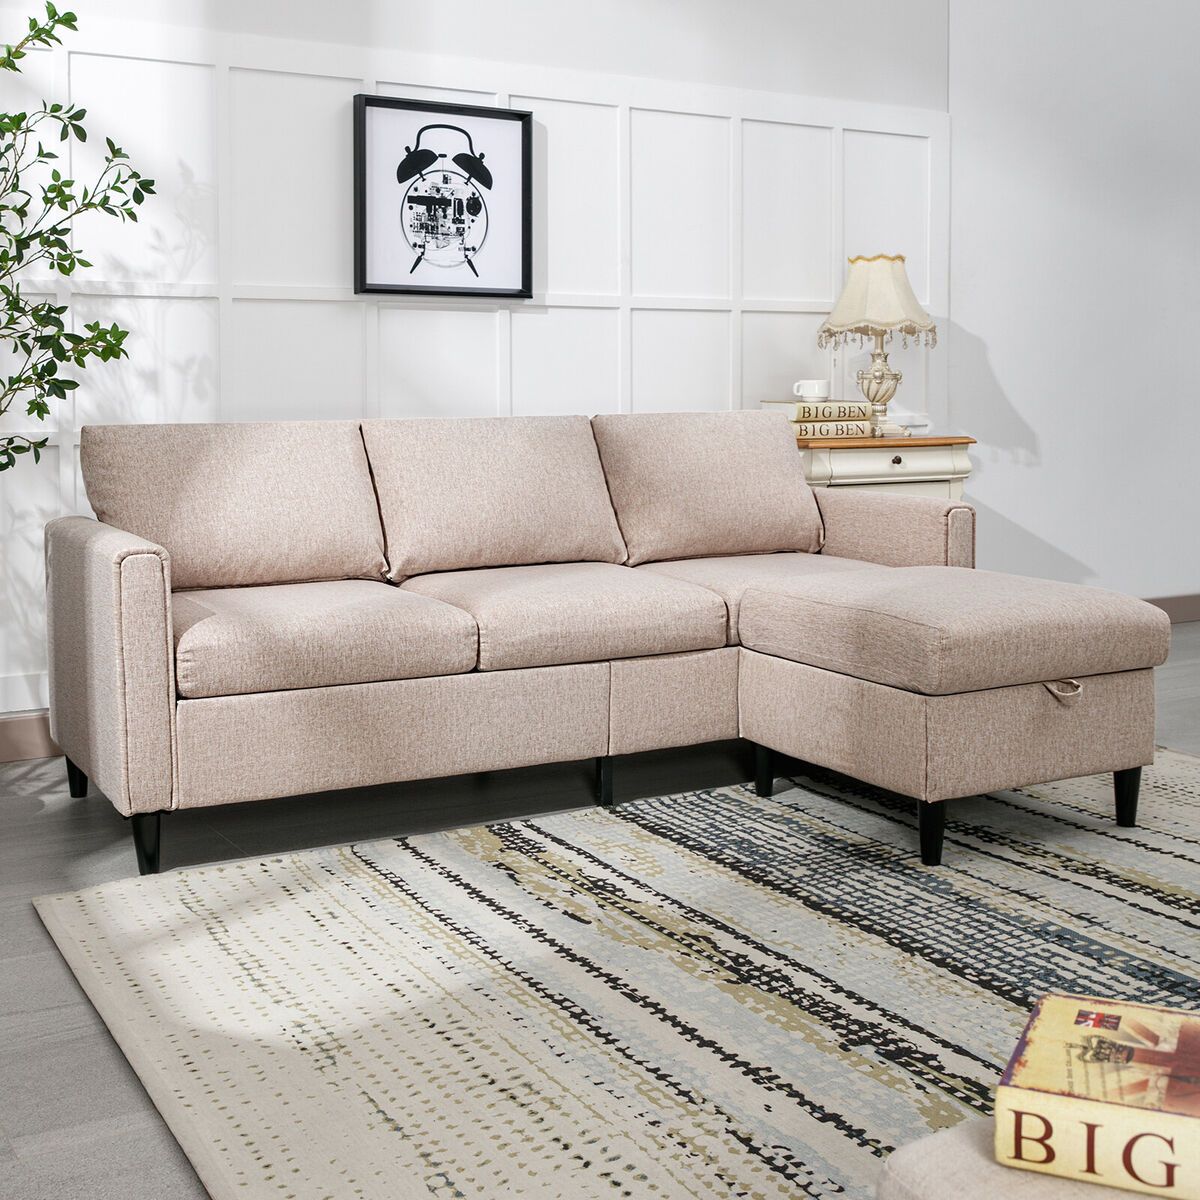 Small Convertible Sectional Sofa Couch, 77"L Shape Sofa With Storage  Ottoman | Ebay In Small L Shaped Sectional Sofas In Beige (View 10 of 15)